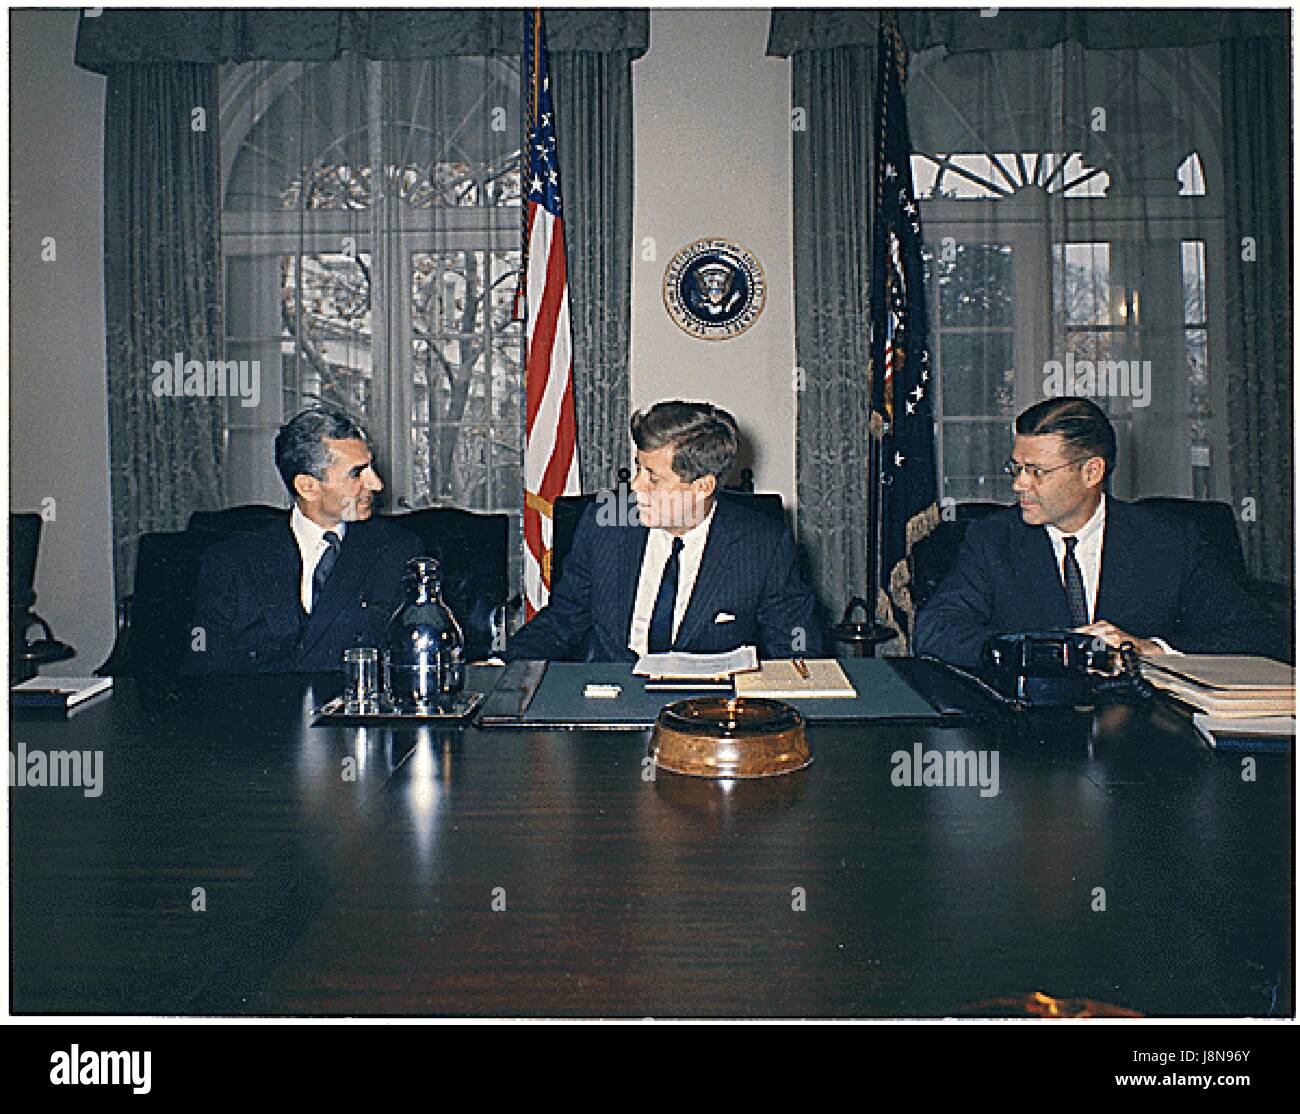 United States President John F. Kennedy meets  the Shah of Iran, Mohammad Reza Shah Pahlavi, in the Cabinet Room at the White House on April 13, 1962.  Left to right:  Shah Pahlavi, President Kennedy, U.S. Secretary of Defense Robert McNamara..Credit: Robert Knudsen - The White House via CNP /MediaPunch Stock Photo